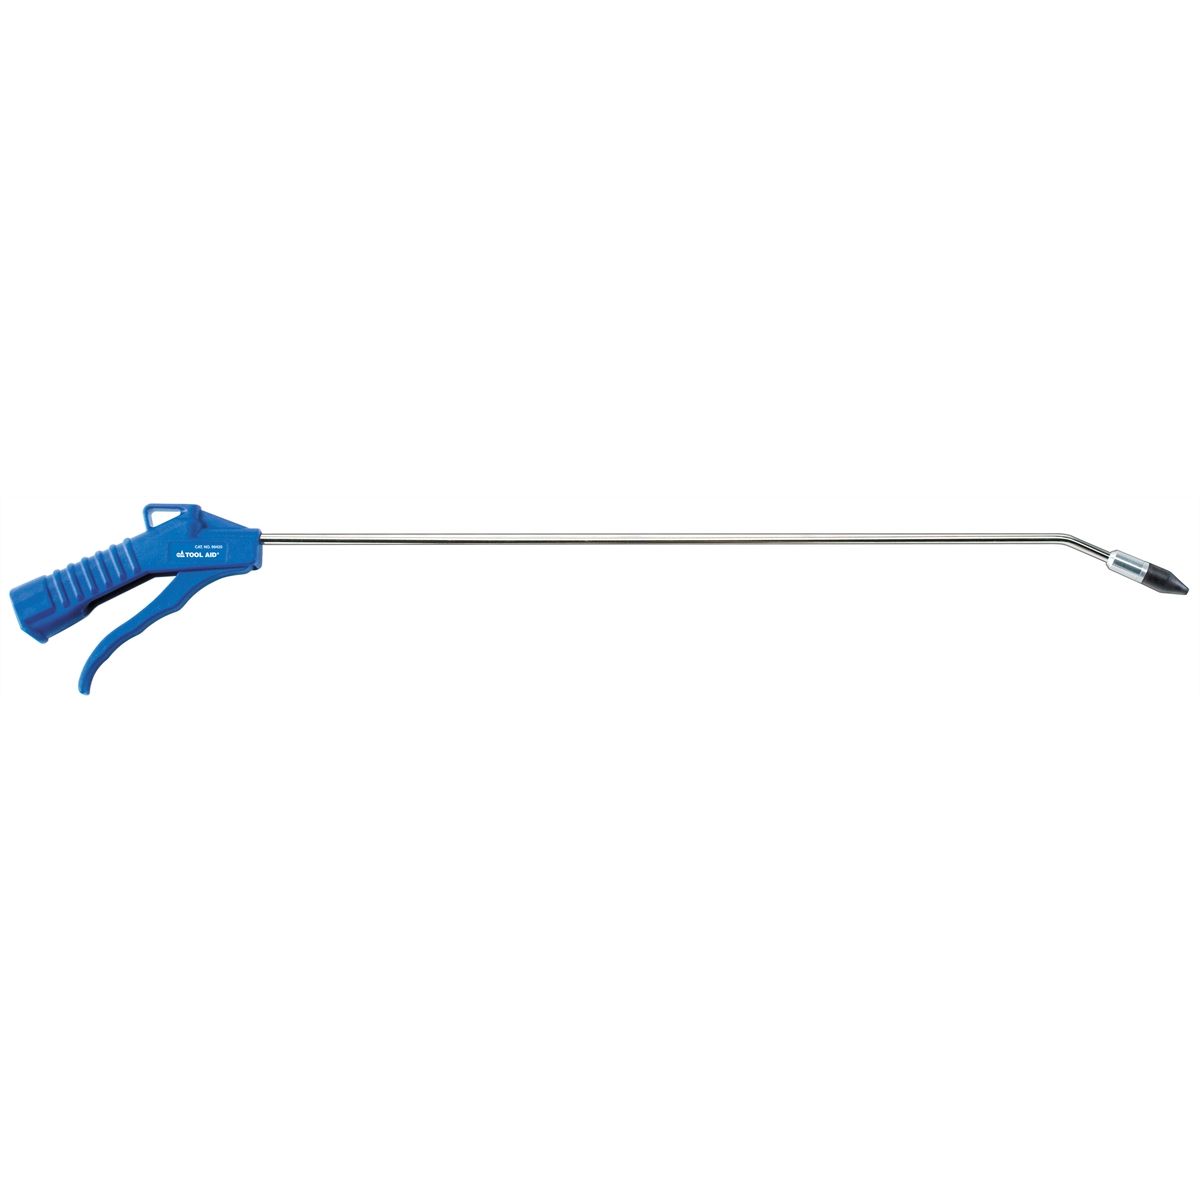 Long Reach Angled Nozzle Blow Gun - 26 In